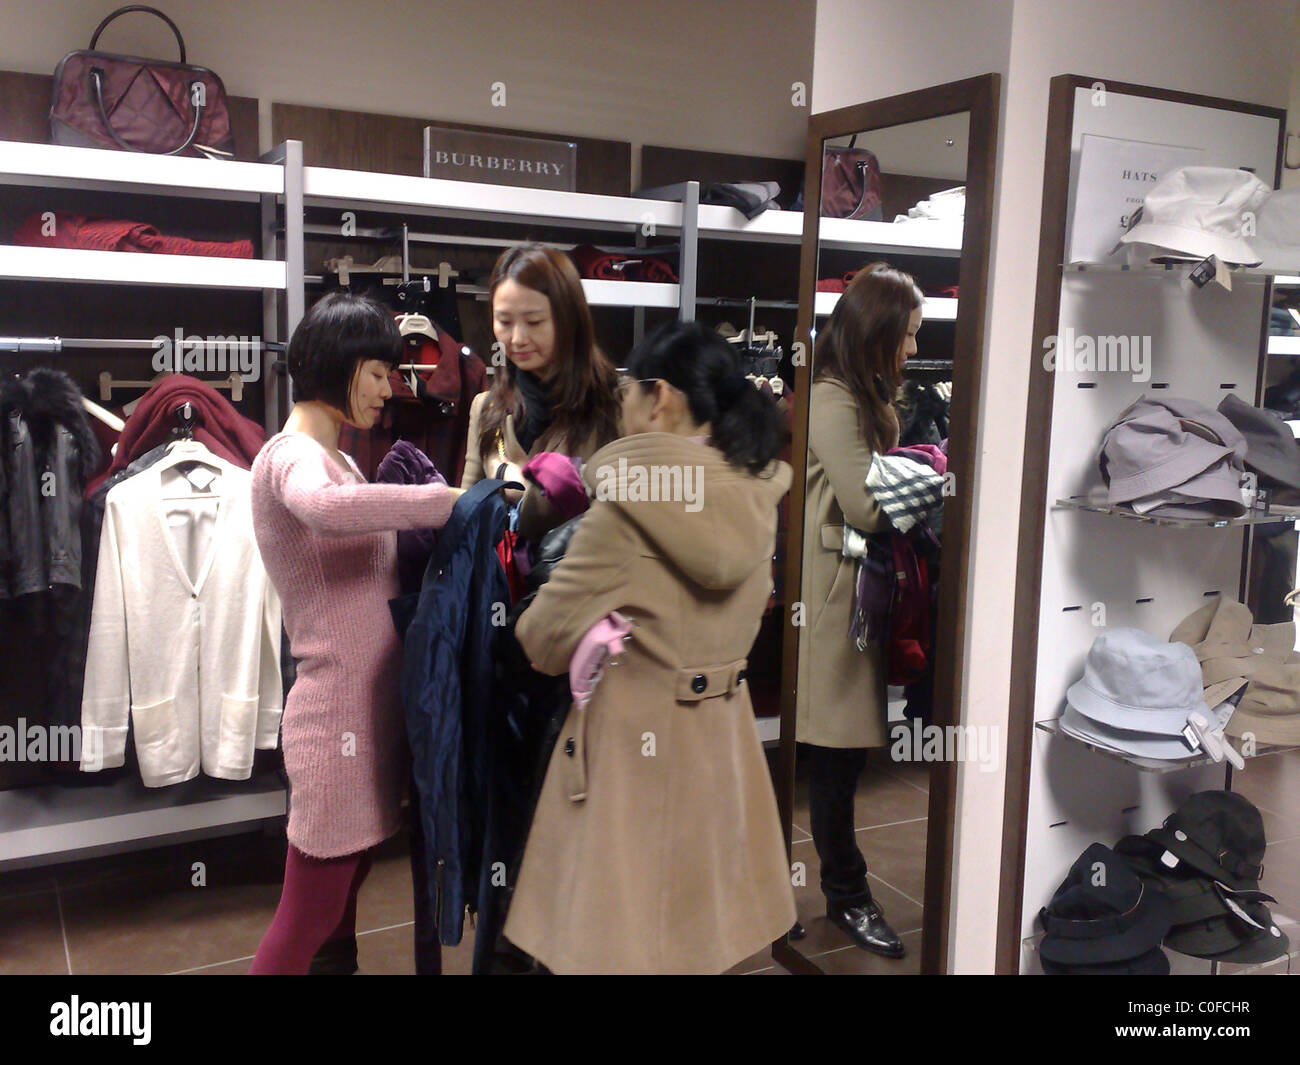 burberry coat outlet